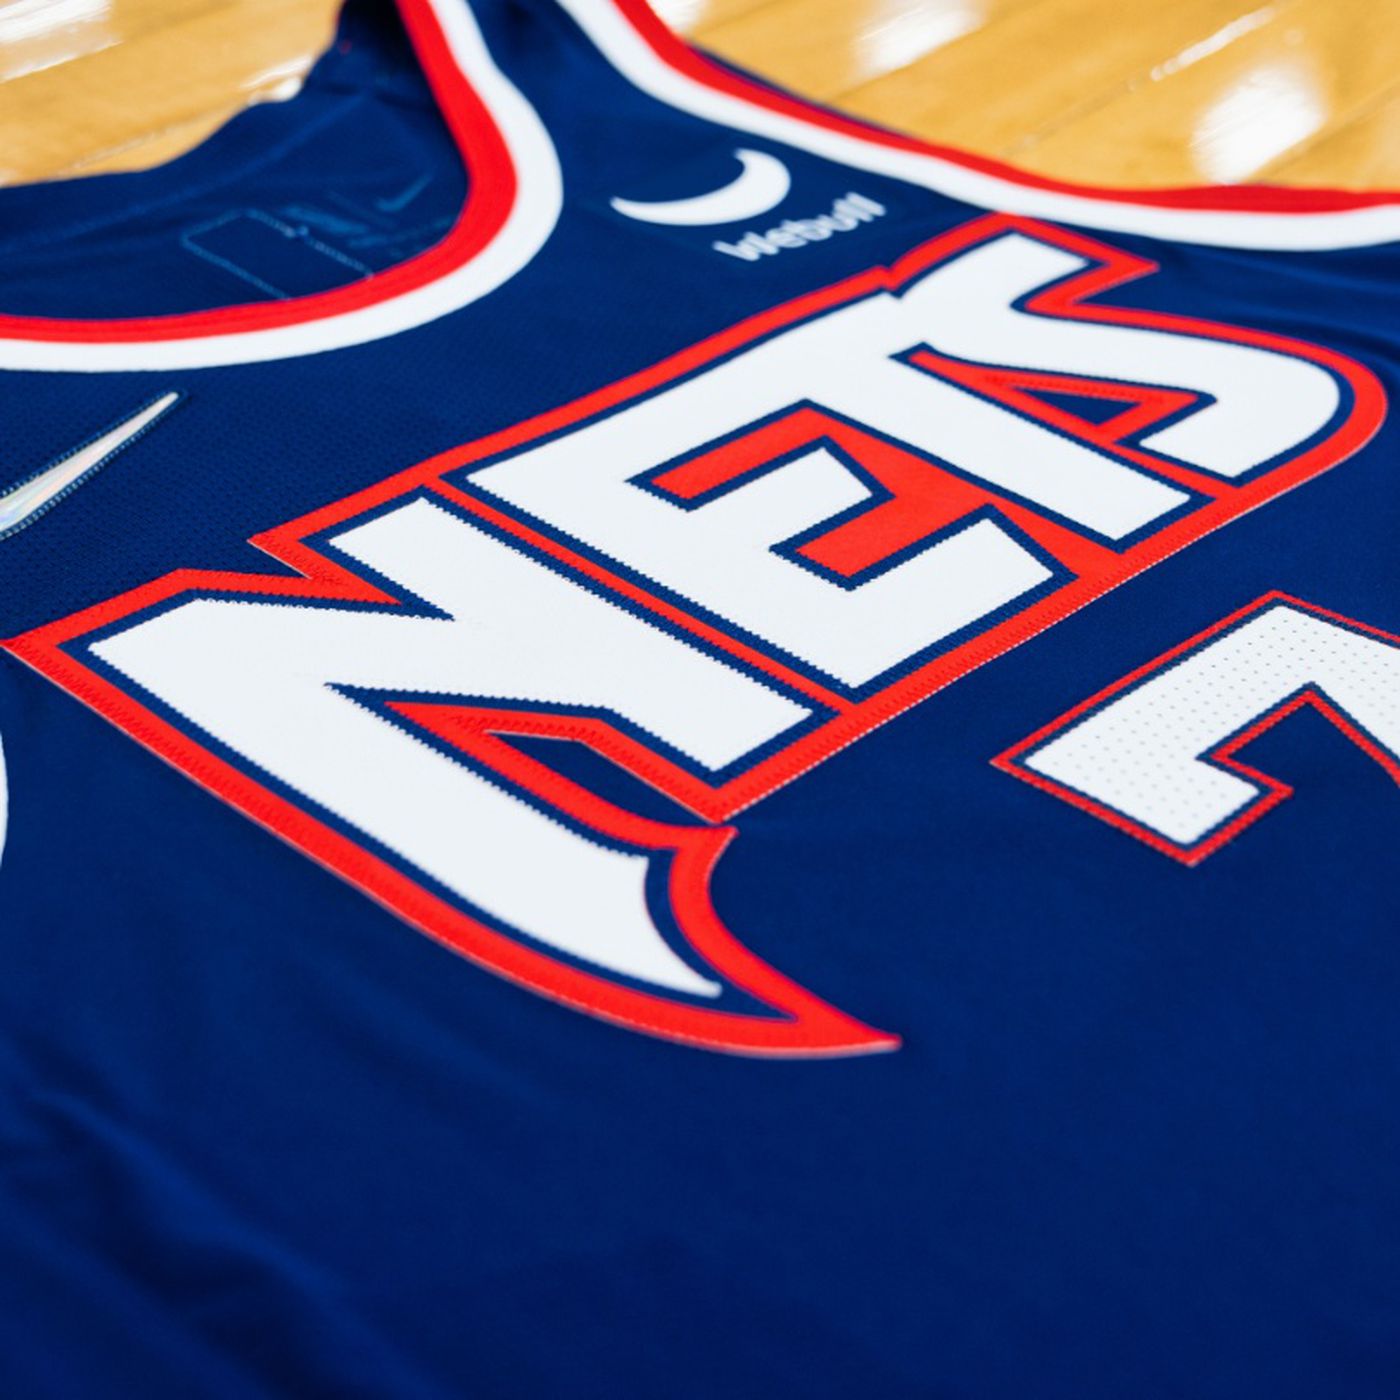 Nets 'City Edition' uniforms pay tribute to New Jersey roots